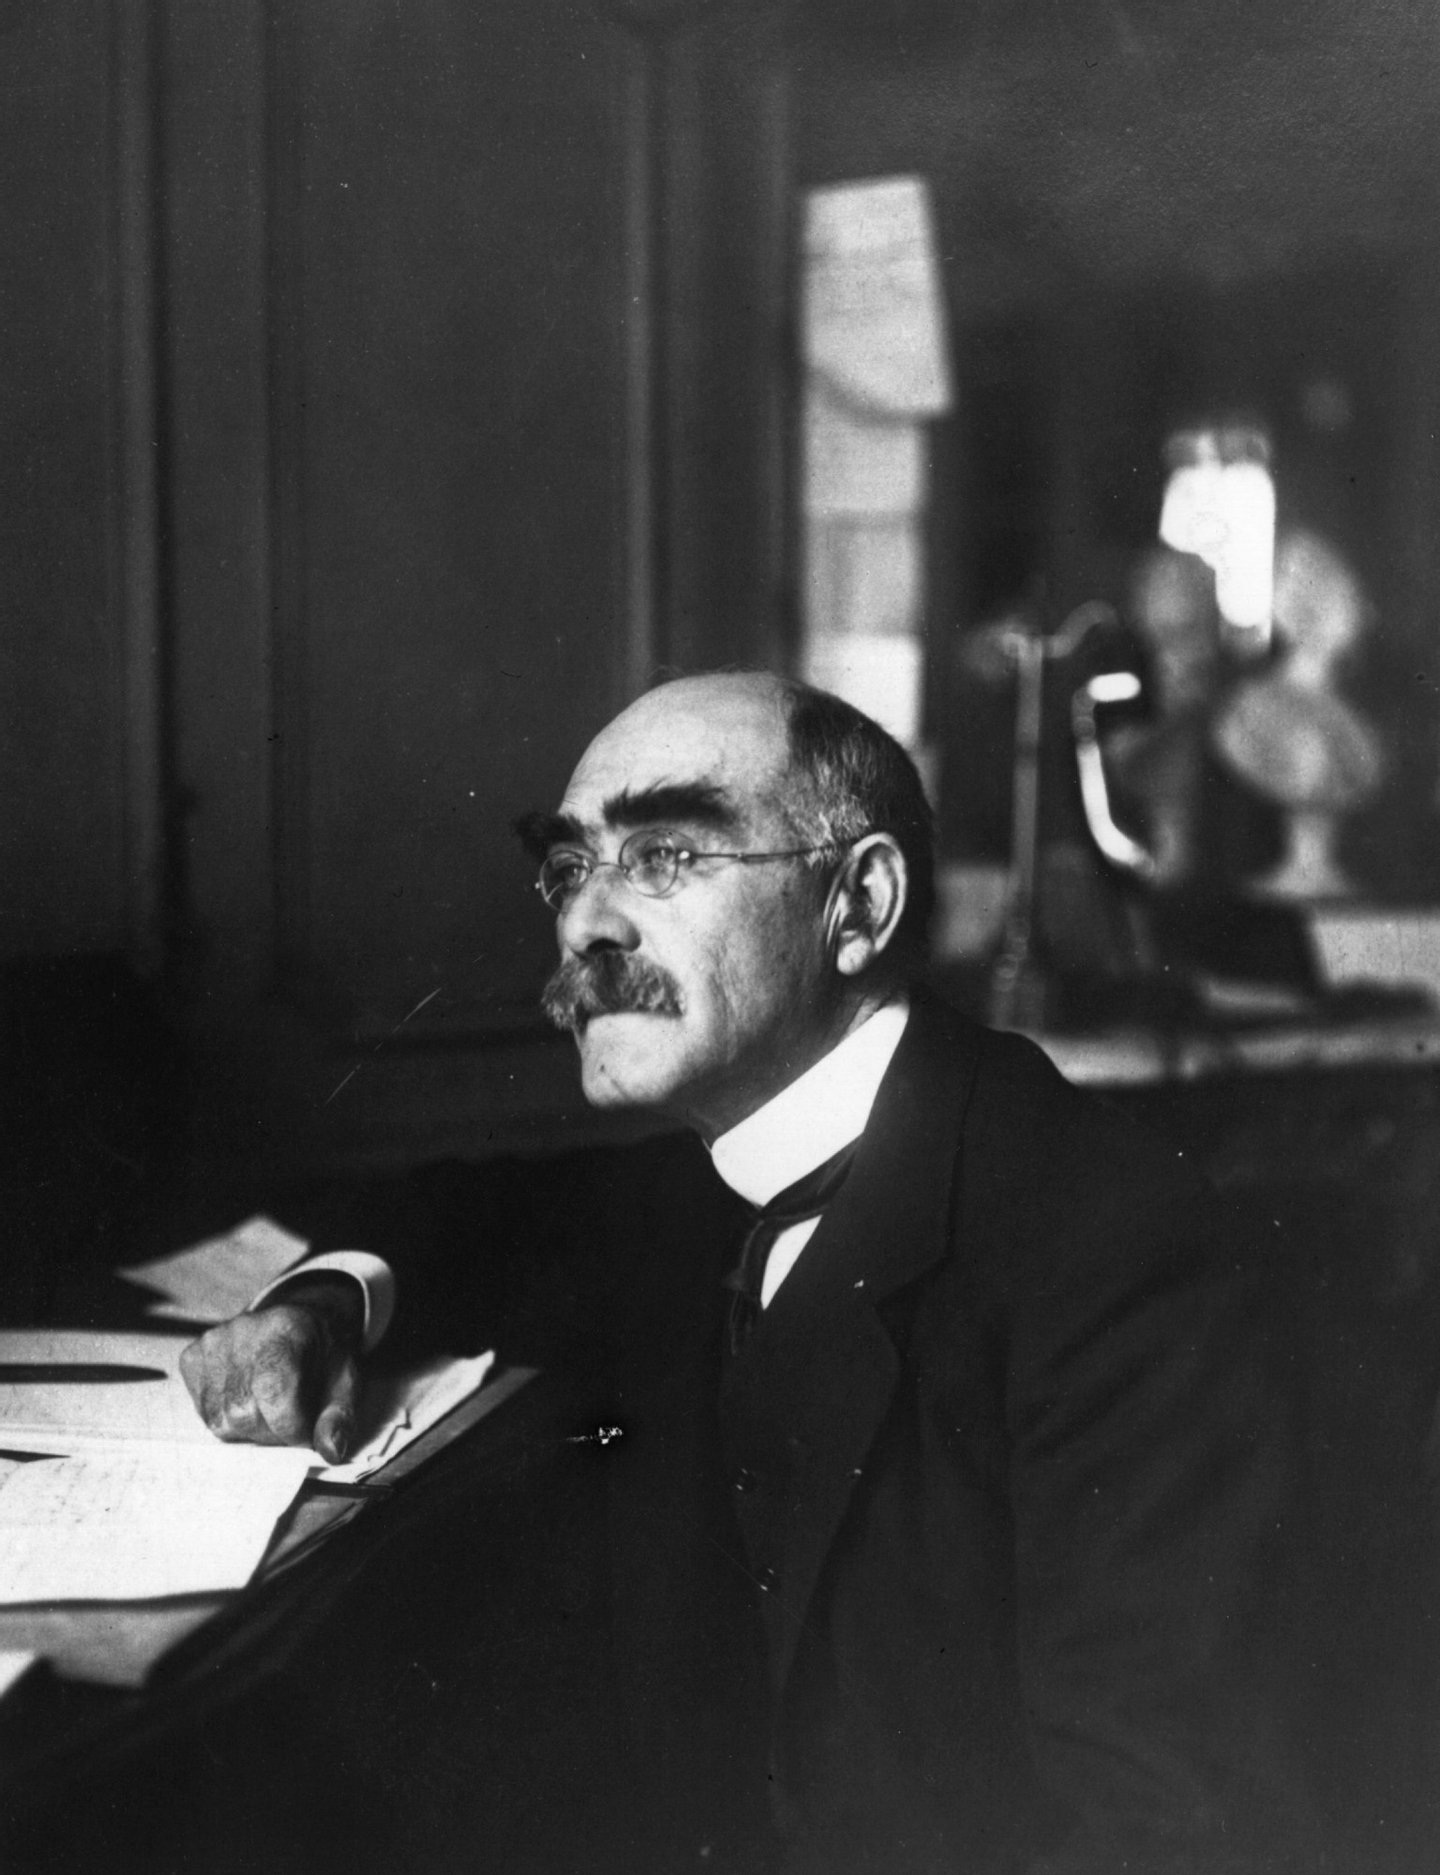 Rudyard Kipling (1865 - 1936), the English author. (Photo by Hulton Archive/Getty Images)